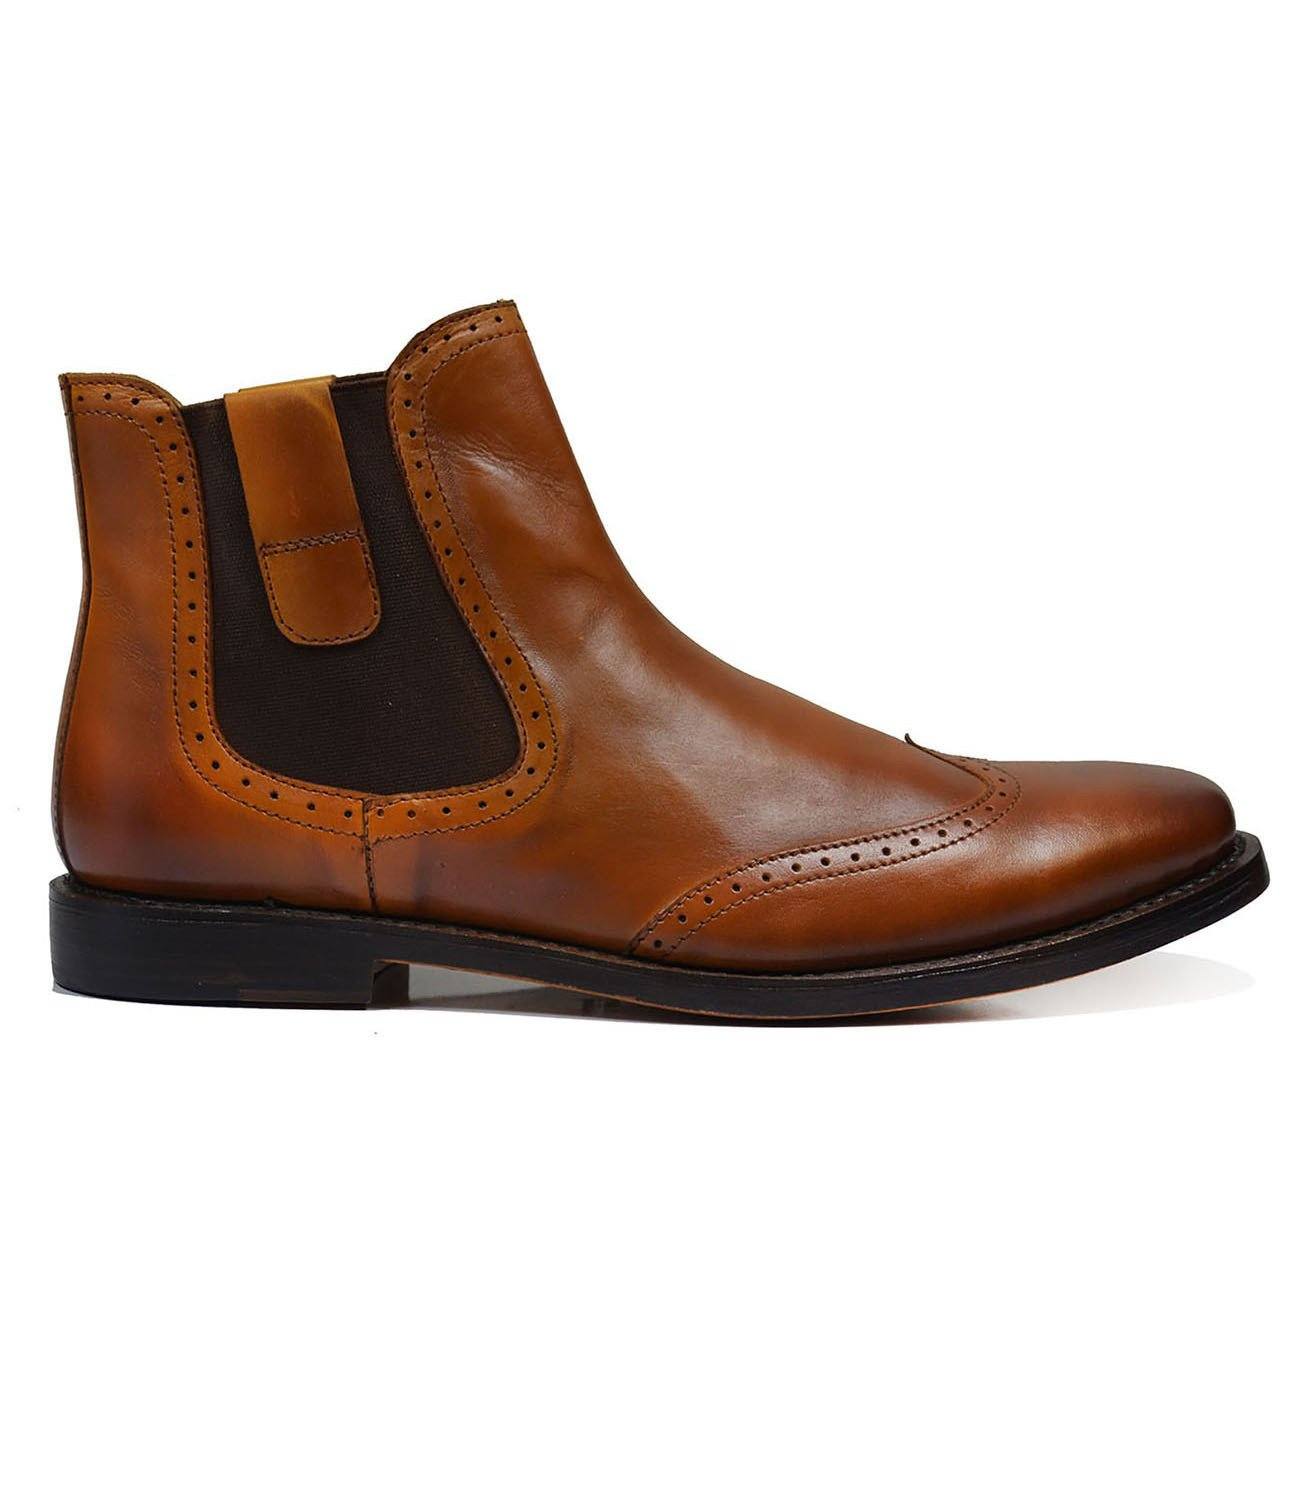 CHELSEA Elegant Brown Full Leather Chelsea Boots | Paul Malone